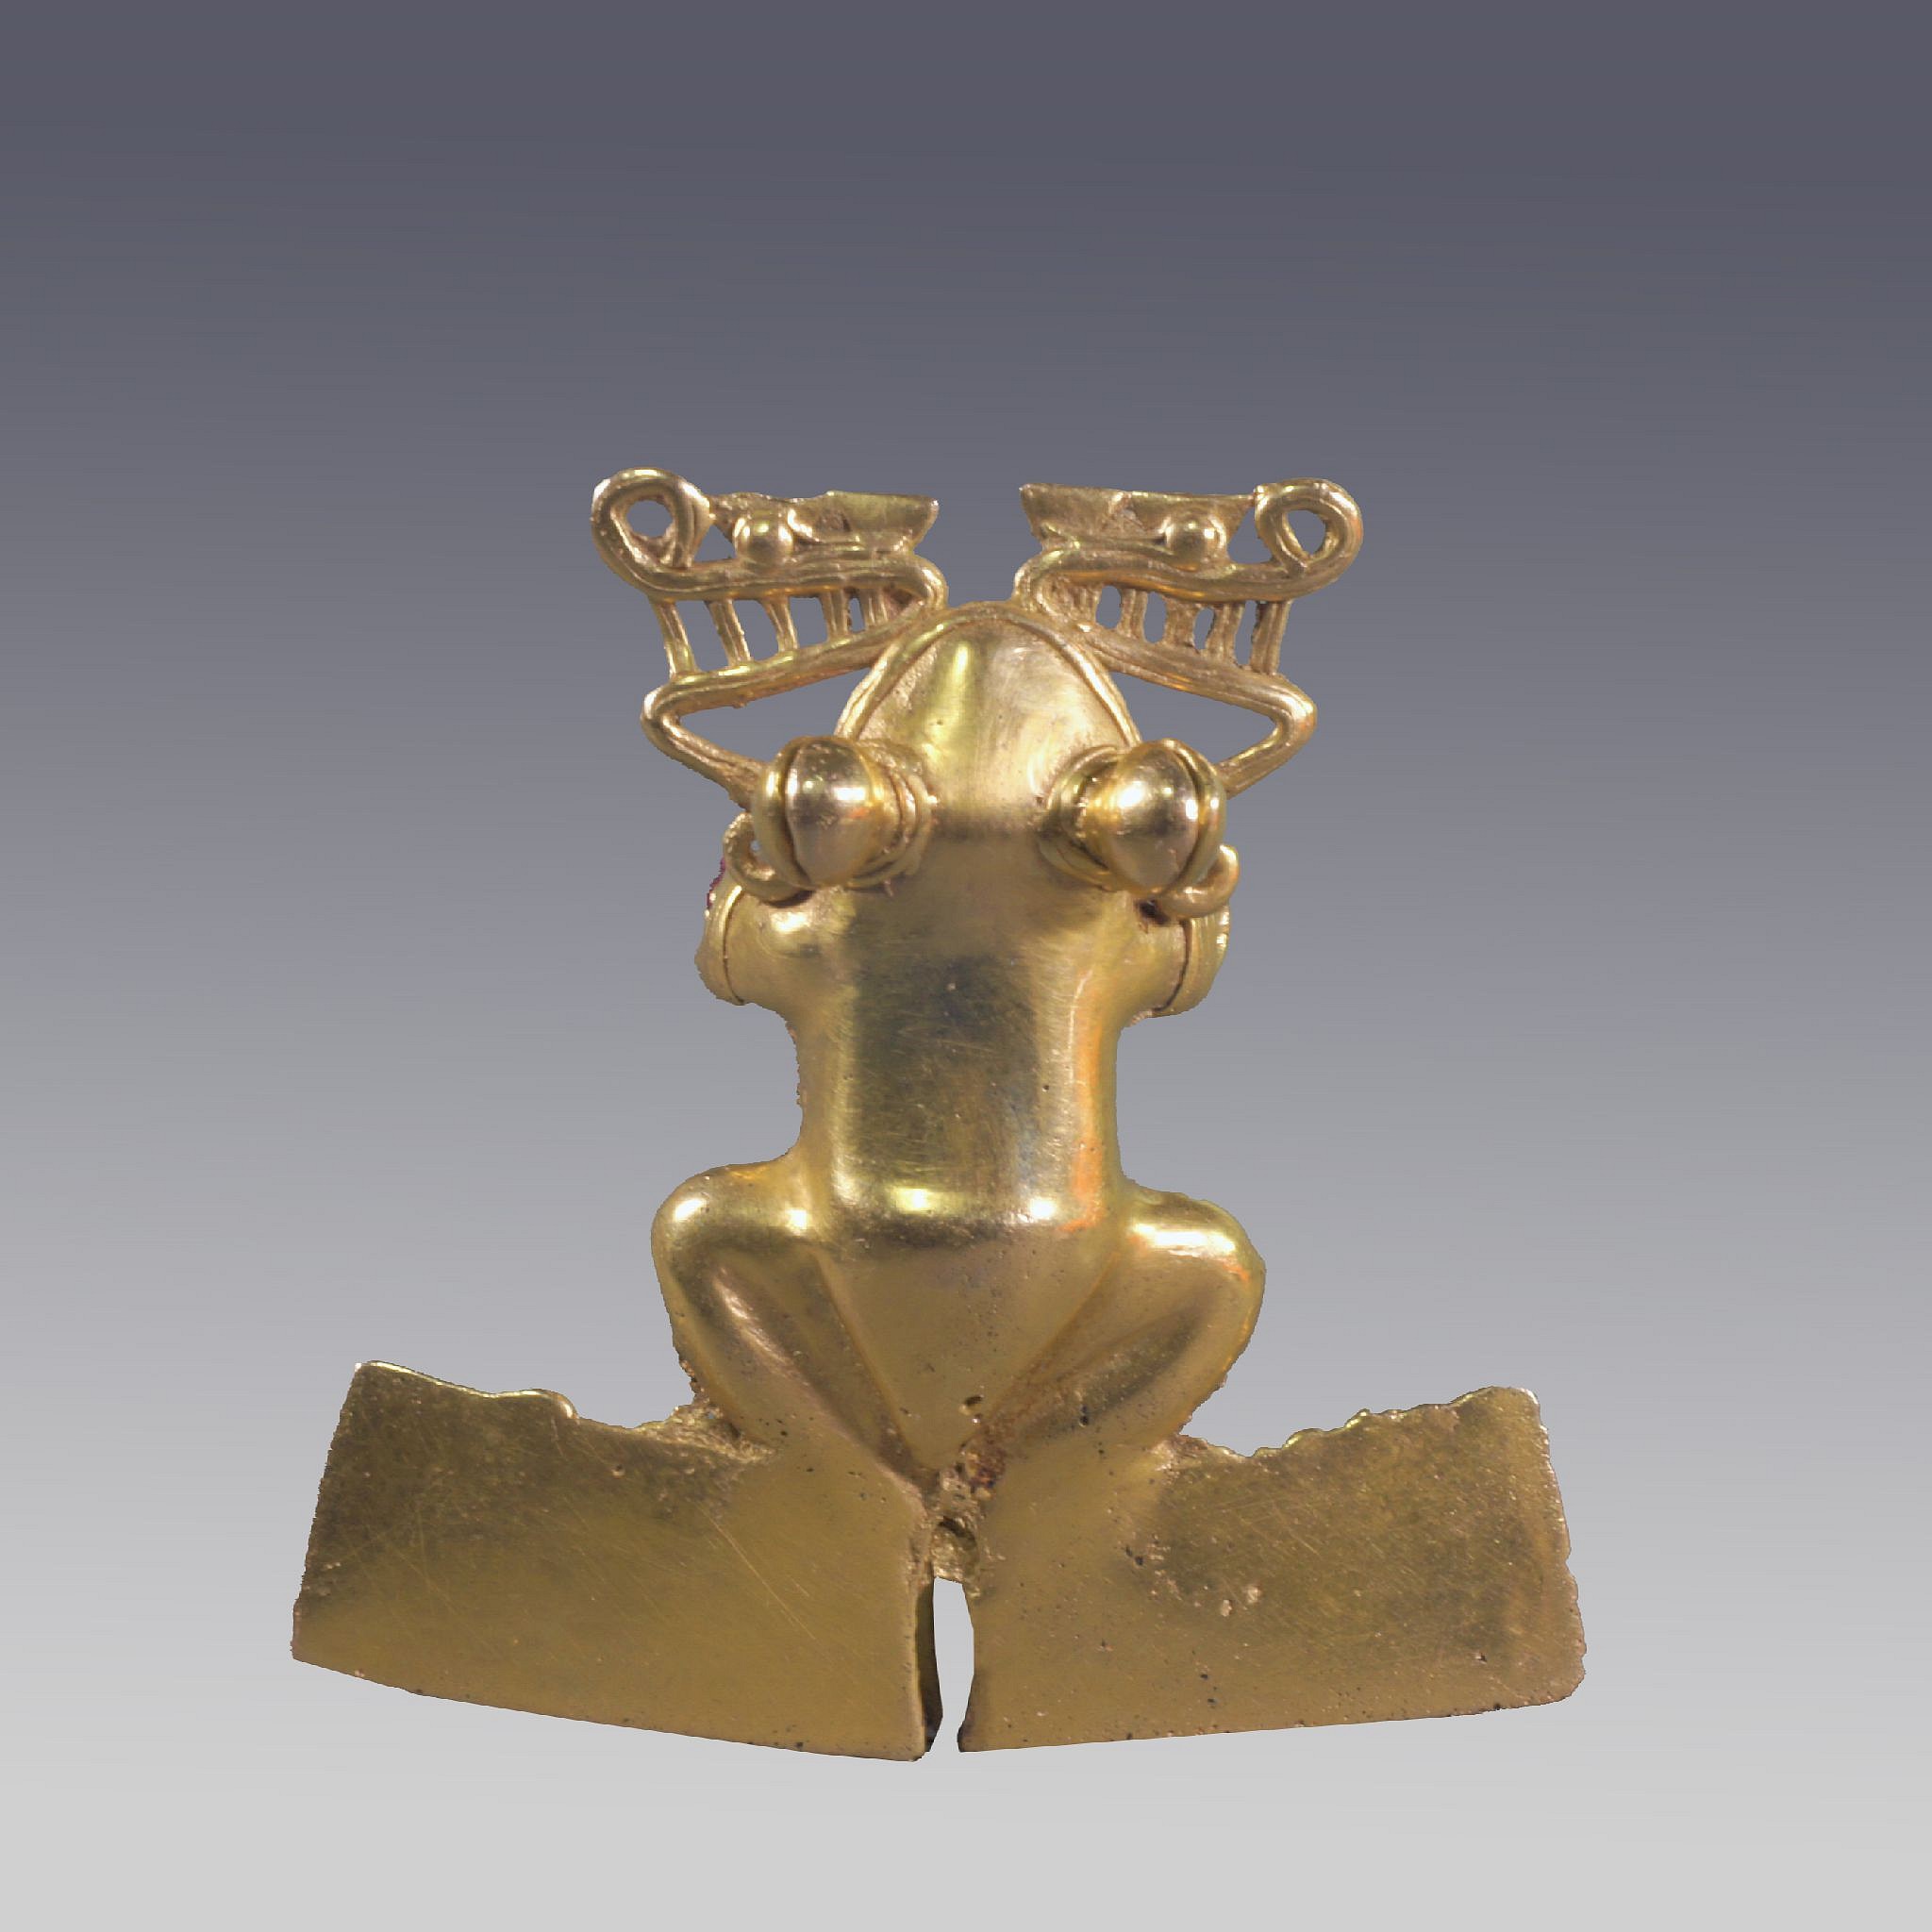 Panama, Diquis Gold Frog With Large Hind Flippers and Bulbous Eyes
The Frog has a classic body with his front legs becoming the suspension loops. From the mouth emanate two saurian heads back to back, with a mythological significance.  The eyes each have a solid pellet inside to make noise when the frog is being worn.  A similar example is illustrated in the Catalog, BETWEEN CONTINENTS/BETWEEN SEAS: Precolumbian Art of Costa Rica, fig. 287.  A similar frog is also the Rockefeller Collection at the Metropolitan Museum of Art.  Originally photographed by Justin Kerr #3081, 2001.
Media: Metal
Dimensions: Length: 3 3/4" x Width:3 1/2"    Weight: 65 gramsXRF Au.68.5% Ag.03%, Cu. 31%
&bull;SOLD
n4028